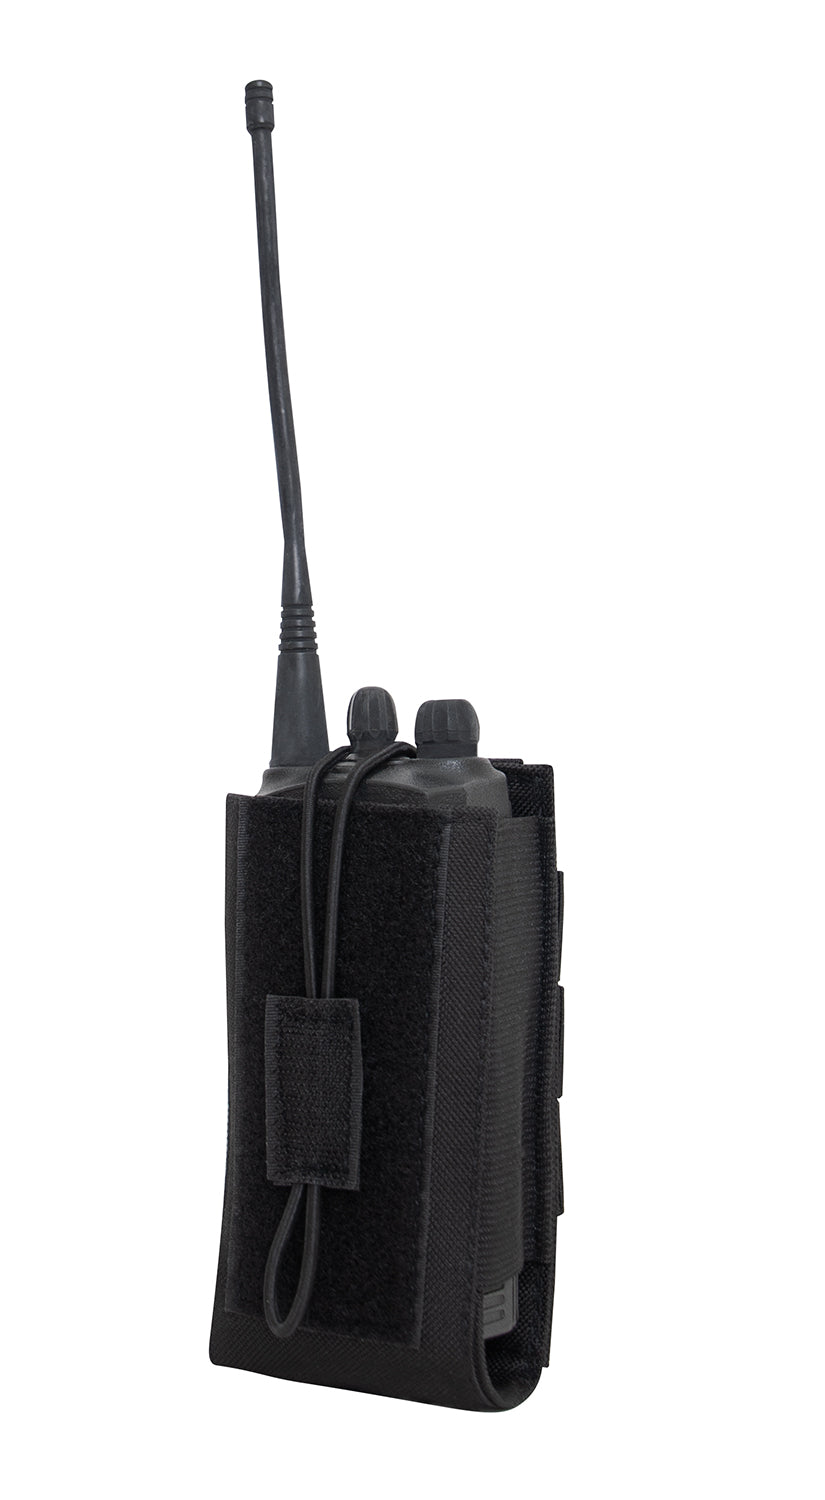 Rothco Molle Compatible Universal Radio Pouch in Black (5" x 2¾” x 1")